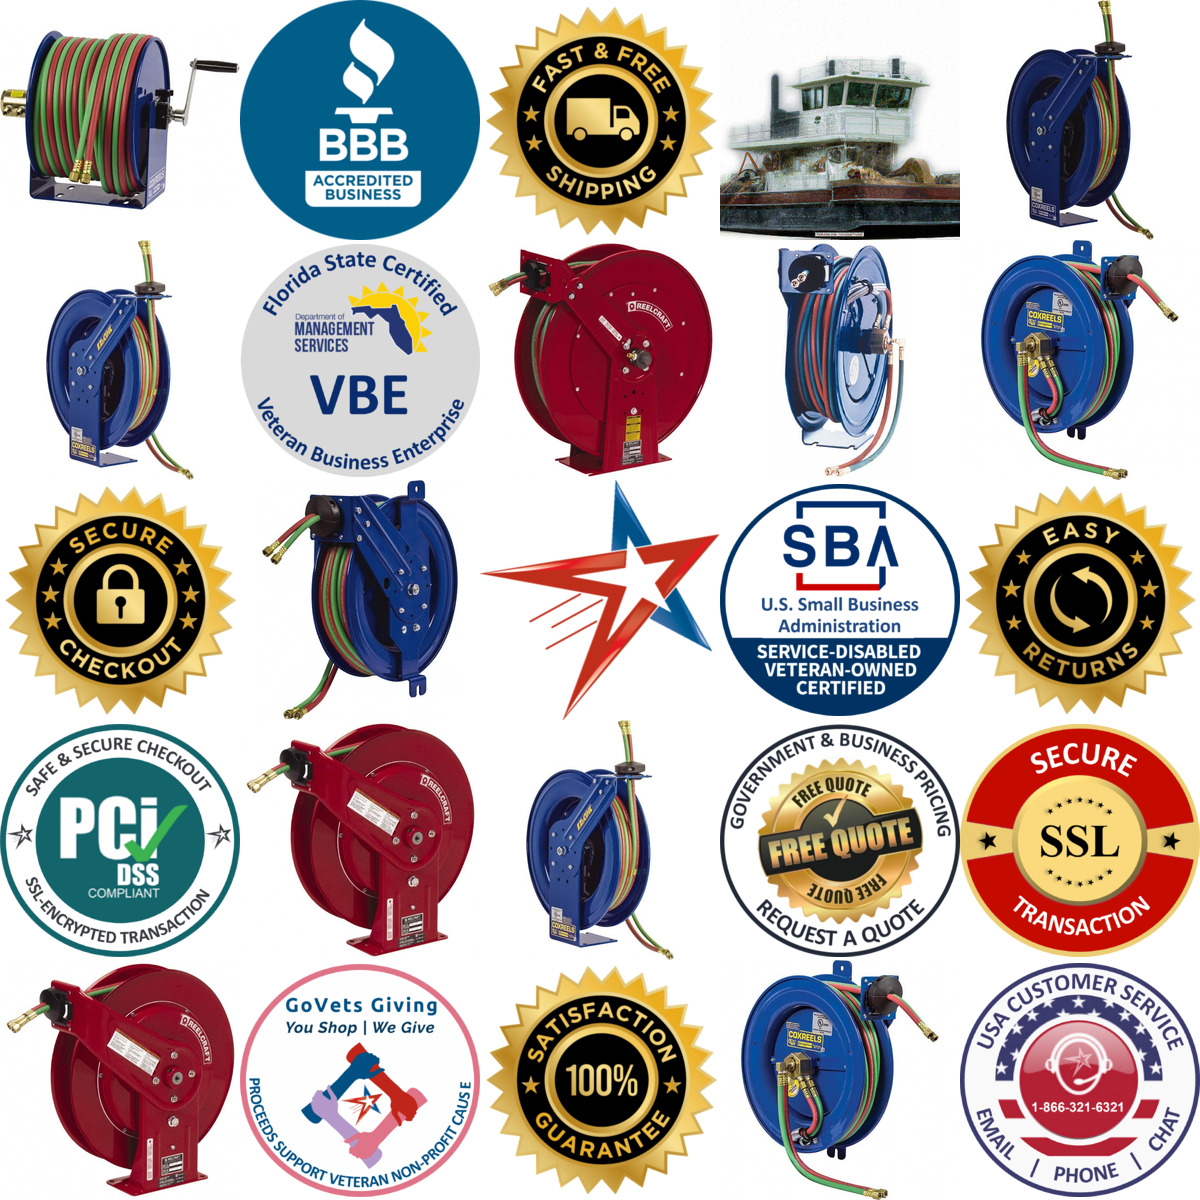 A selection of Welding Hose Reels products on GoVets